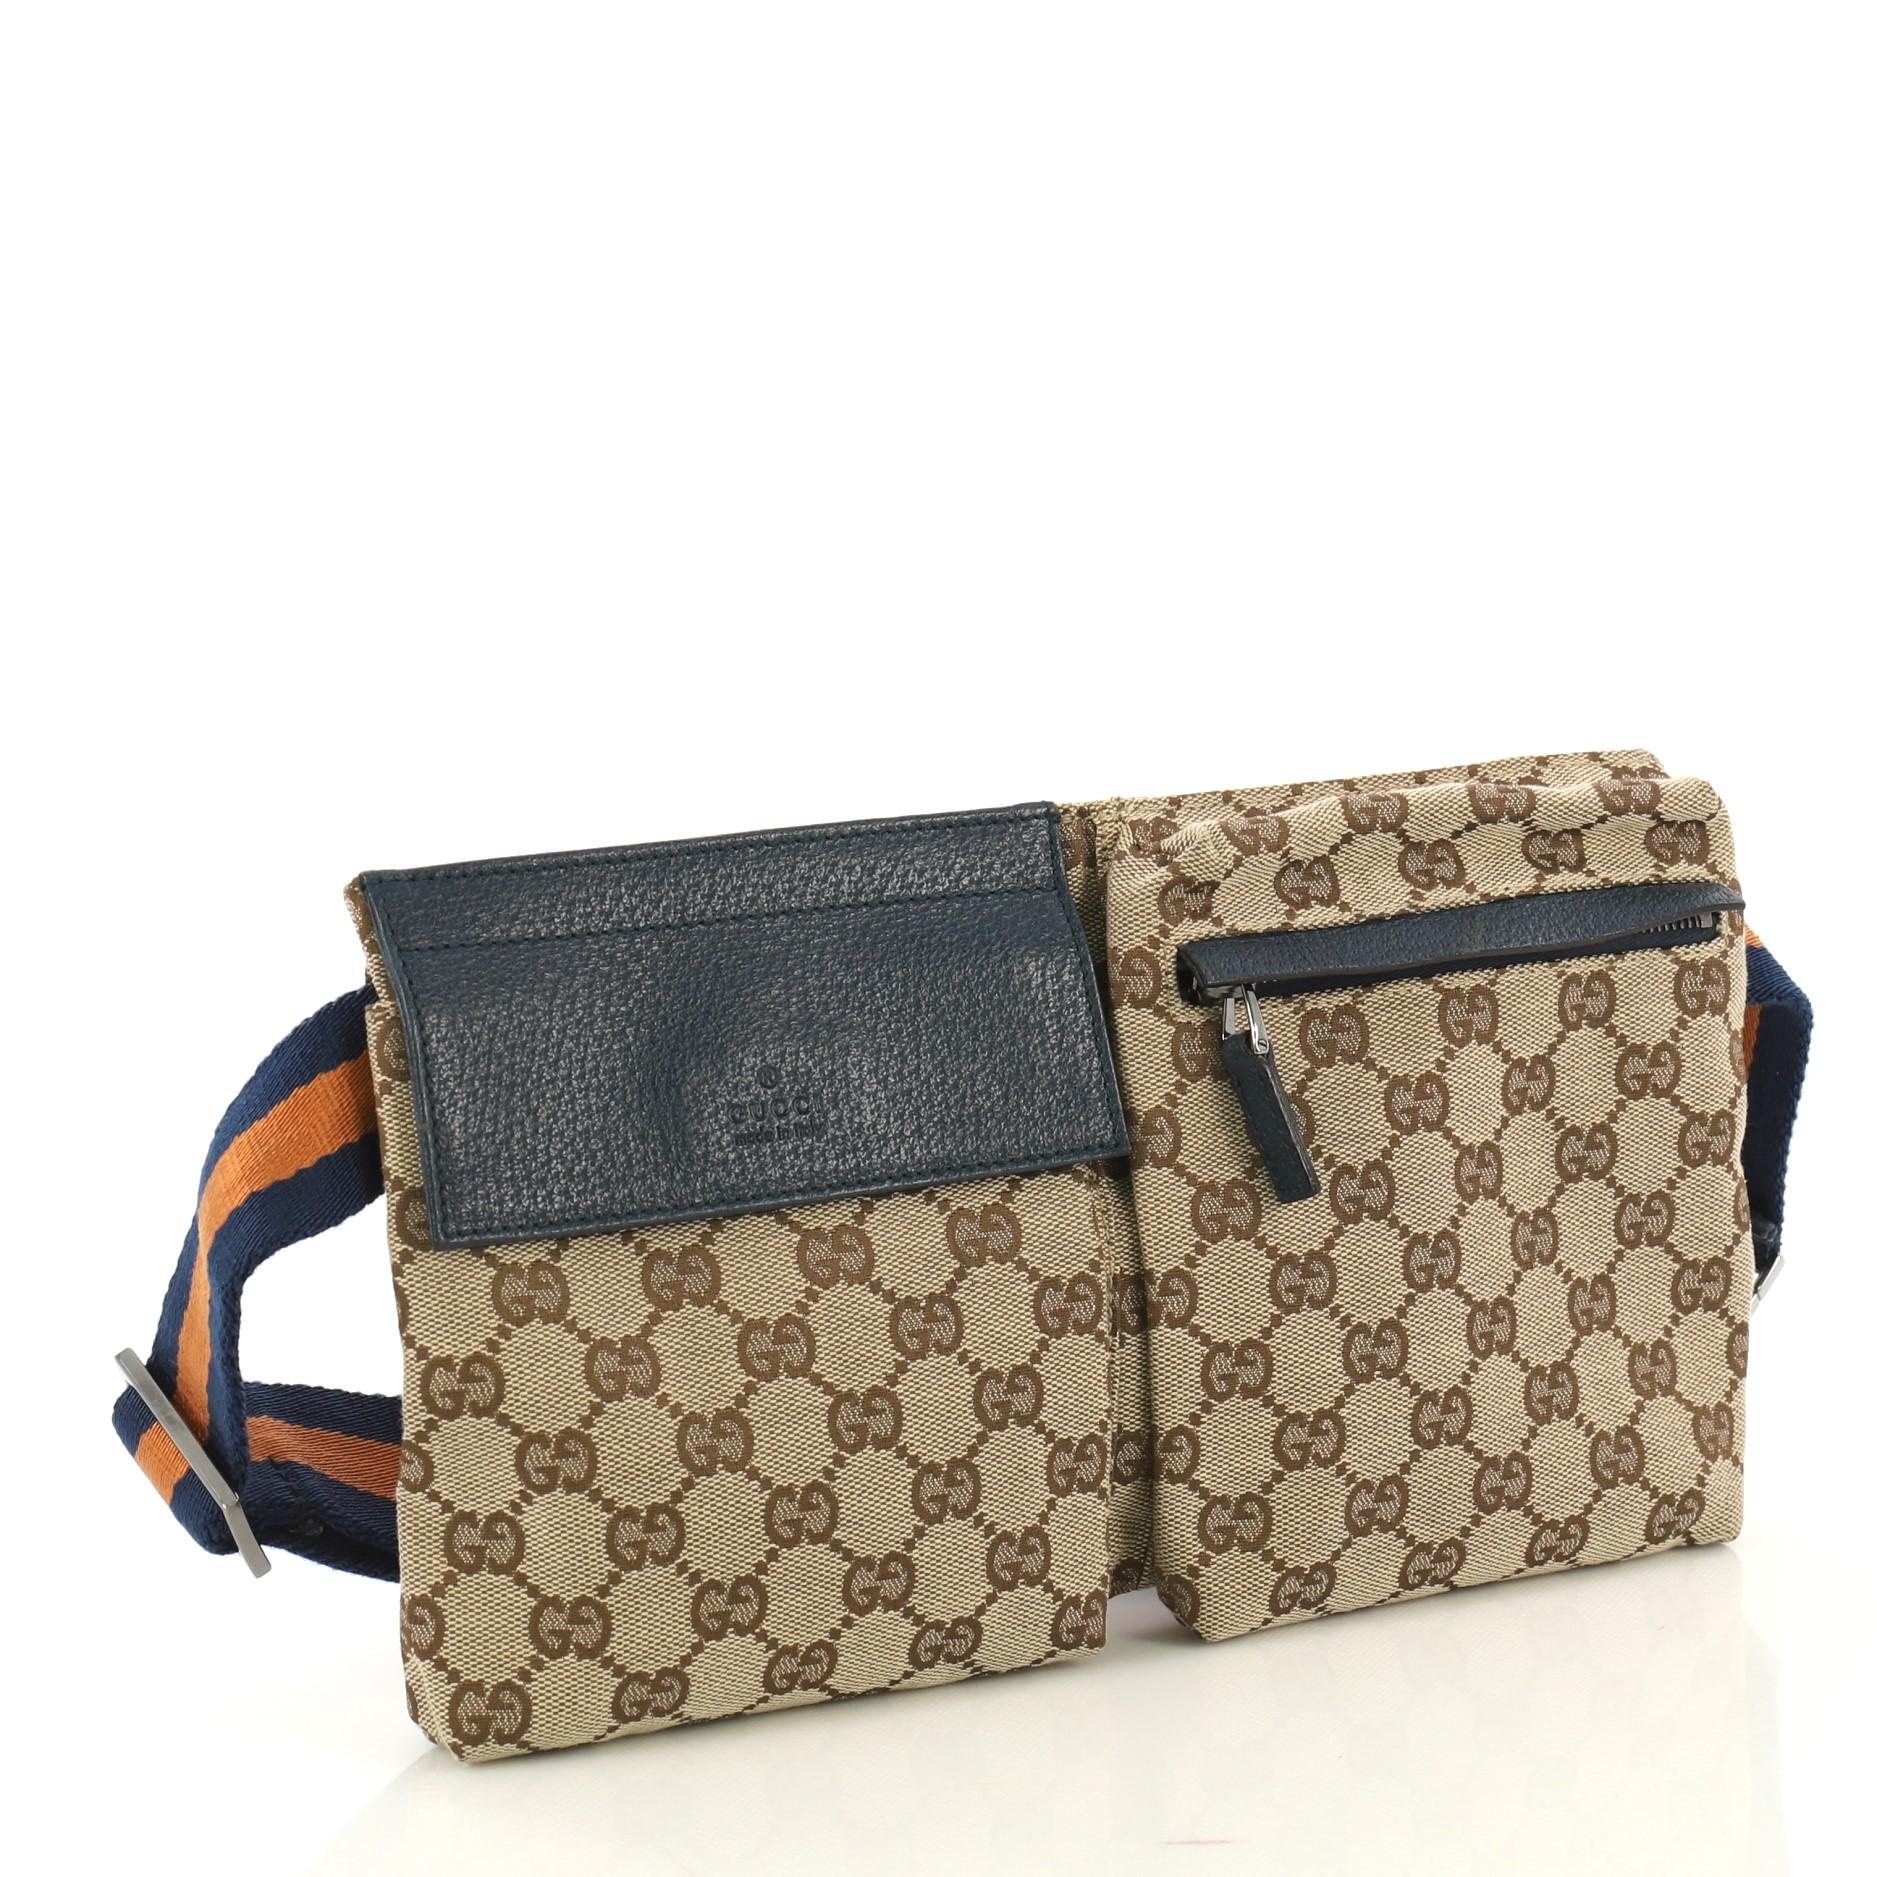 This Gucci Vintage Double Belt Bag GG Canvas, crafted in brown GG canvas, features an adjustable textile strap, front zip and snap pockets, and gunmetal-tone hardware. Its zip closure opens to a blue fabric interior. 

Condition: Great. Minor scuffs